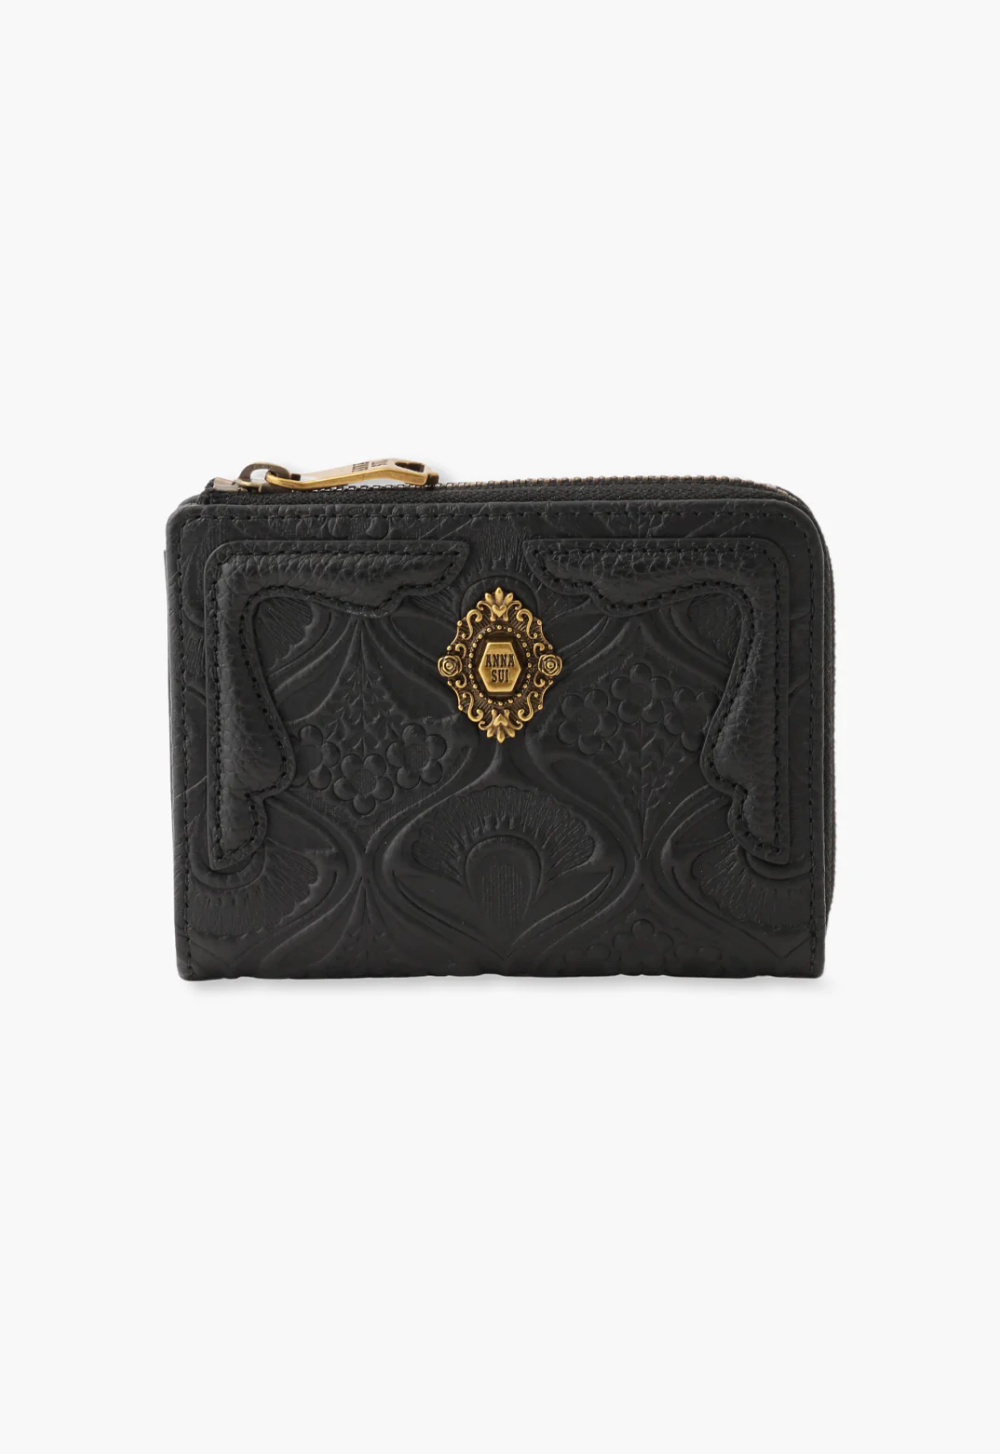 Mini matte leather wallet, Victorian embossed patterns, finished with a vintage Anna Sui logo and zipper closure